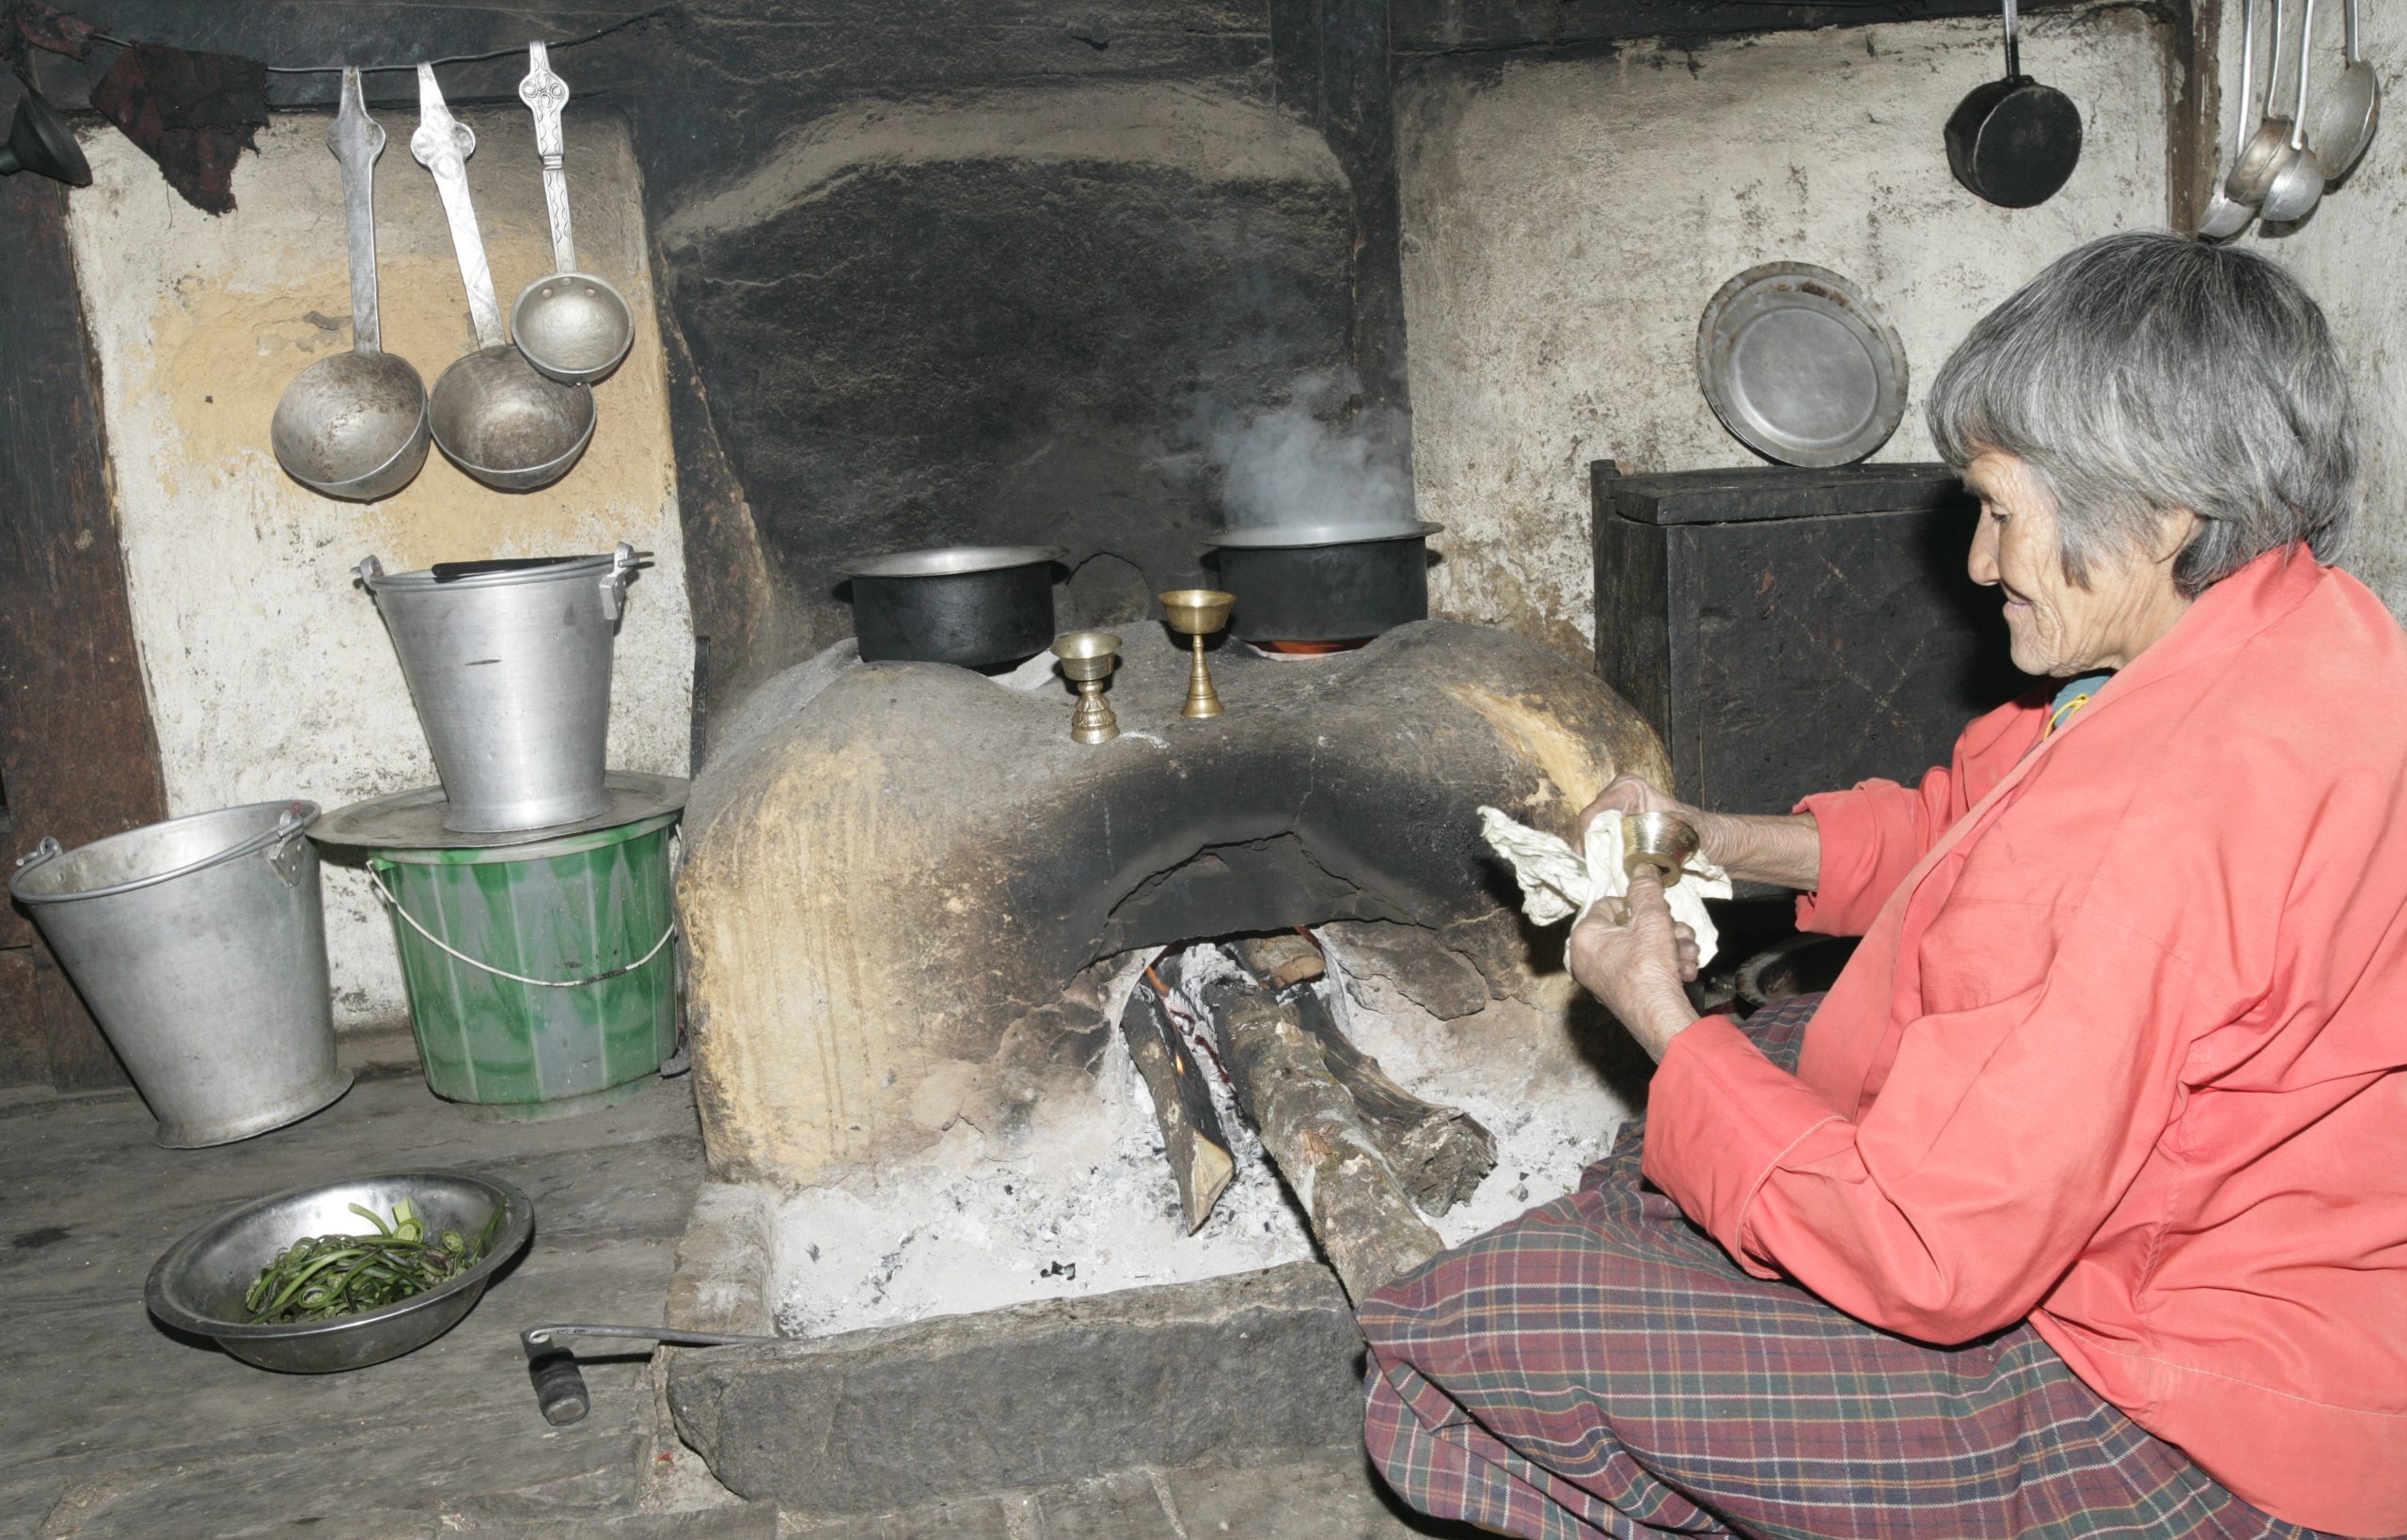 Cooking Food, Cooking Tours in Bhutan